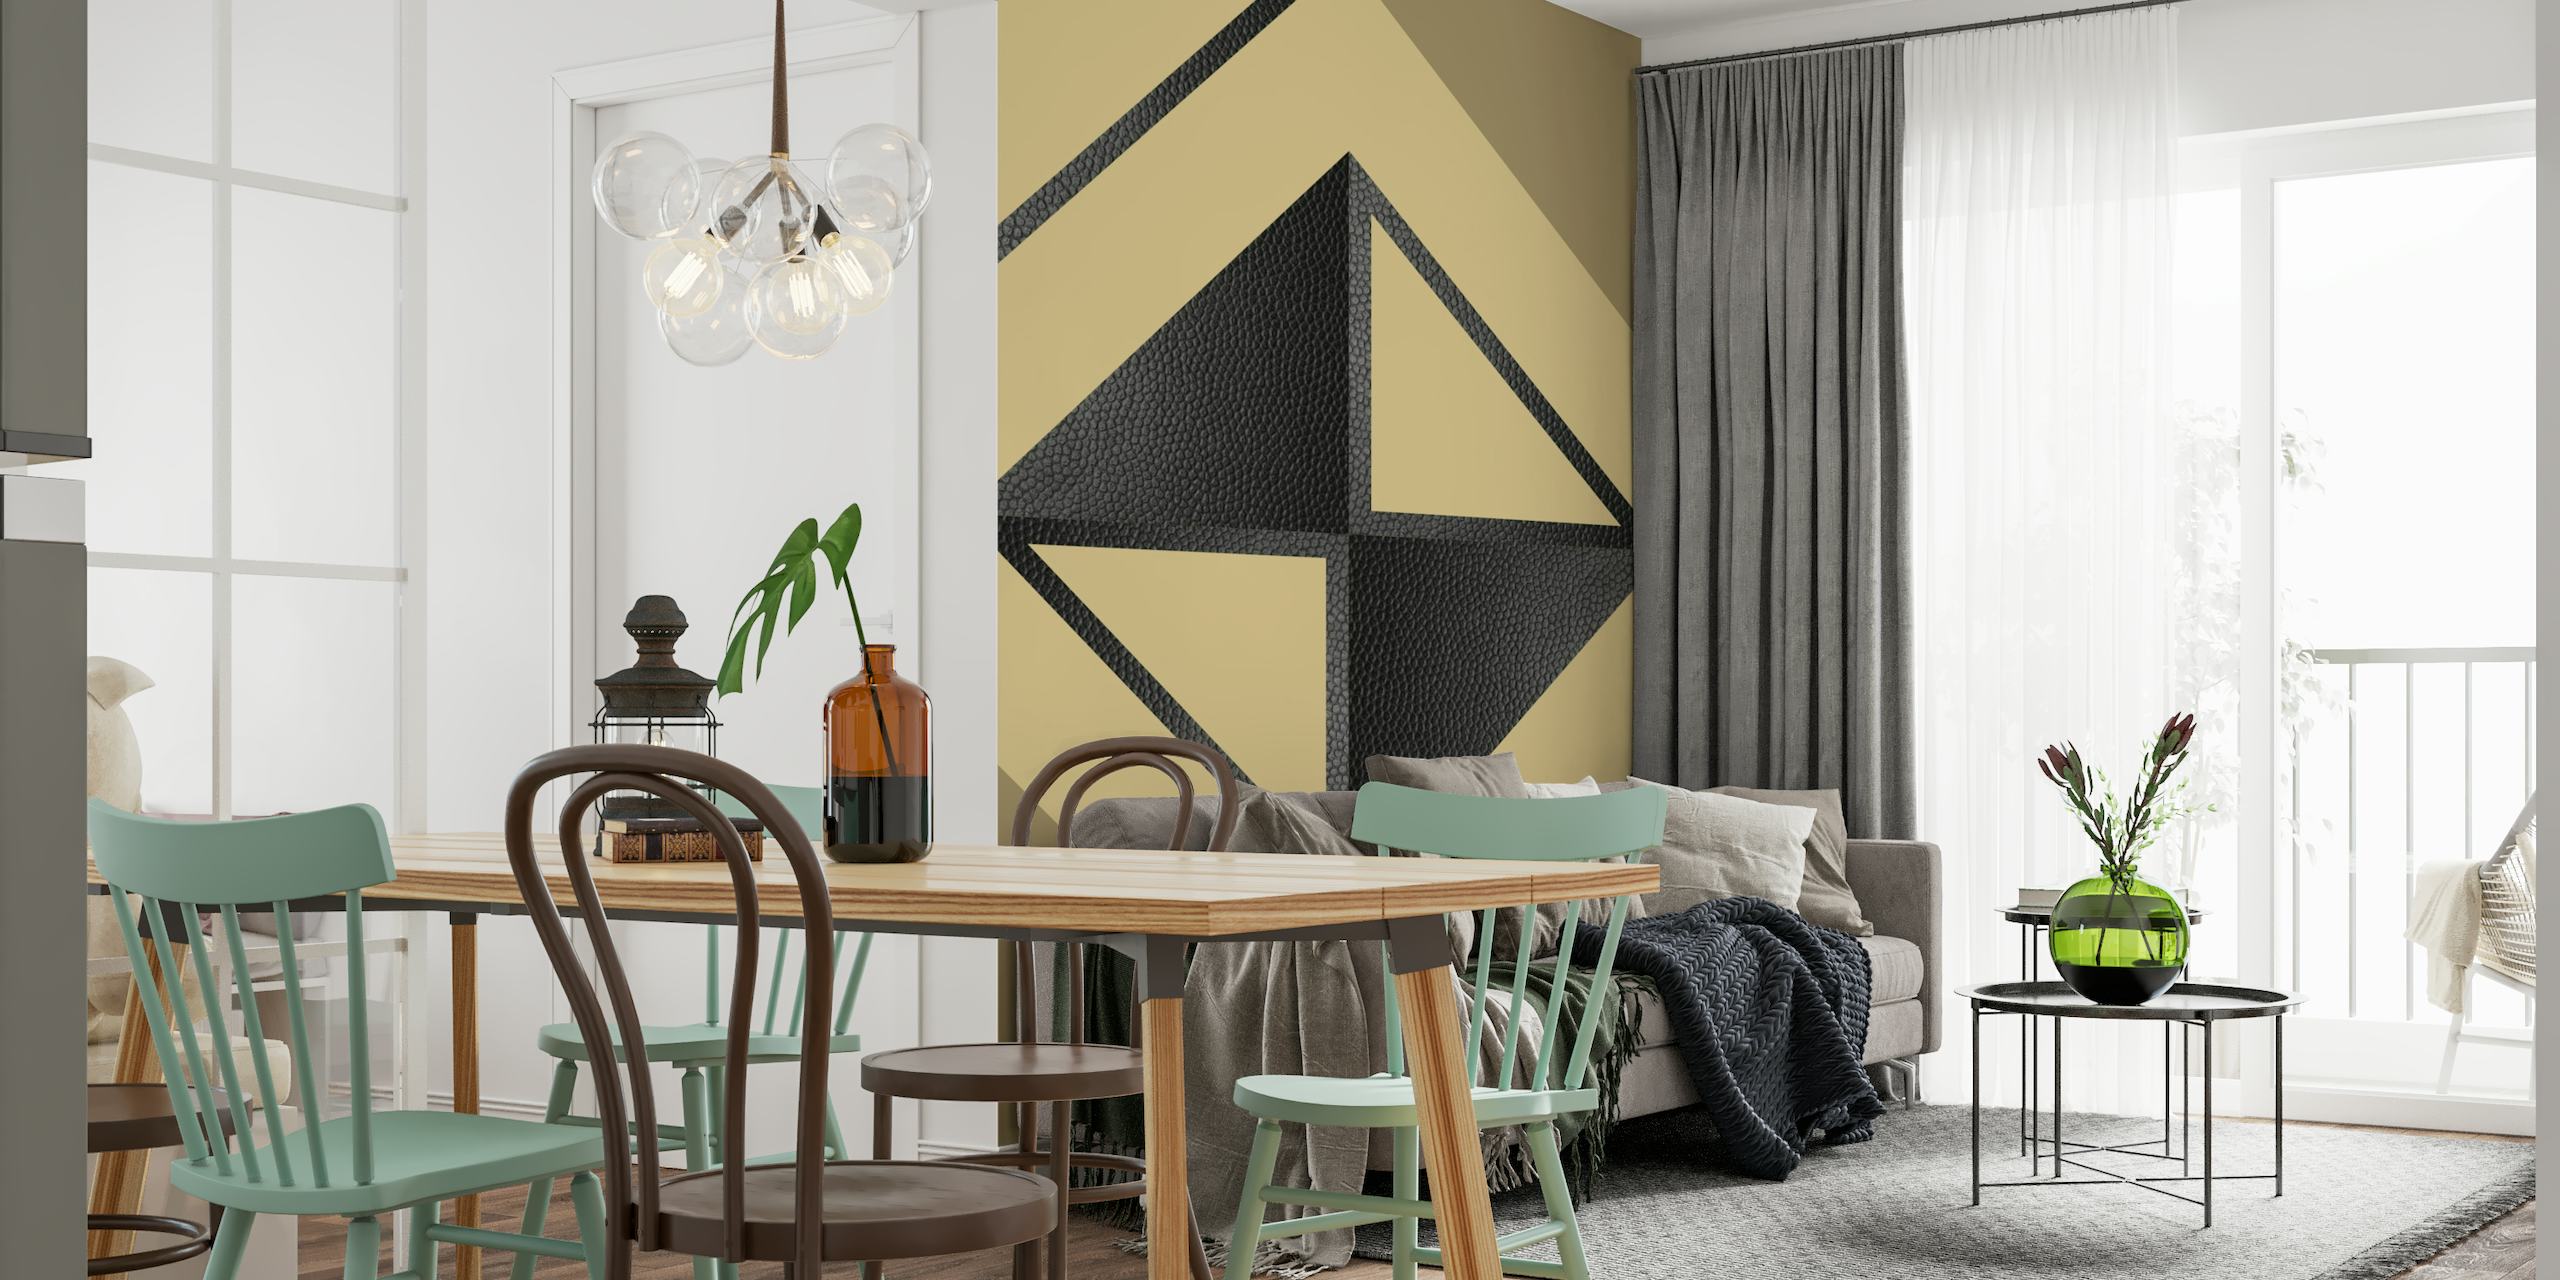 Yellow and Black Abstract Geometric Wall Mural featuring minimalistic triangles and shapes